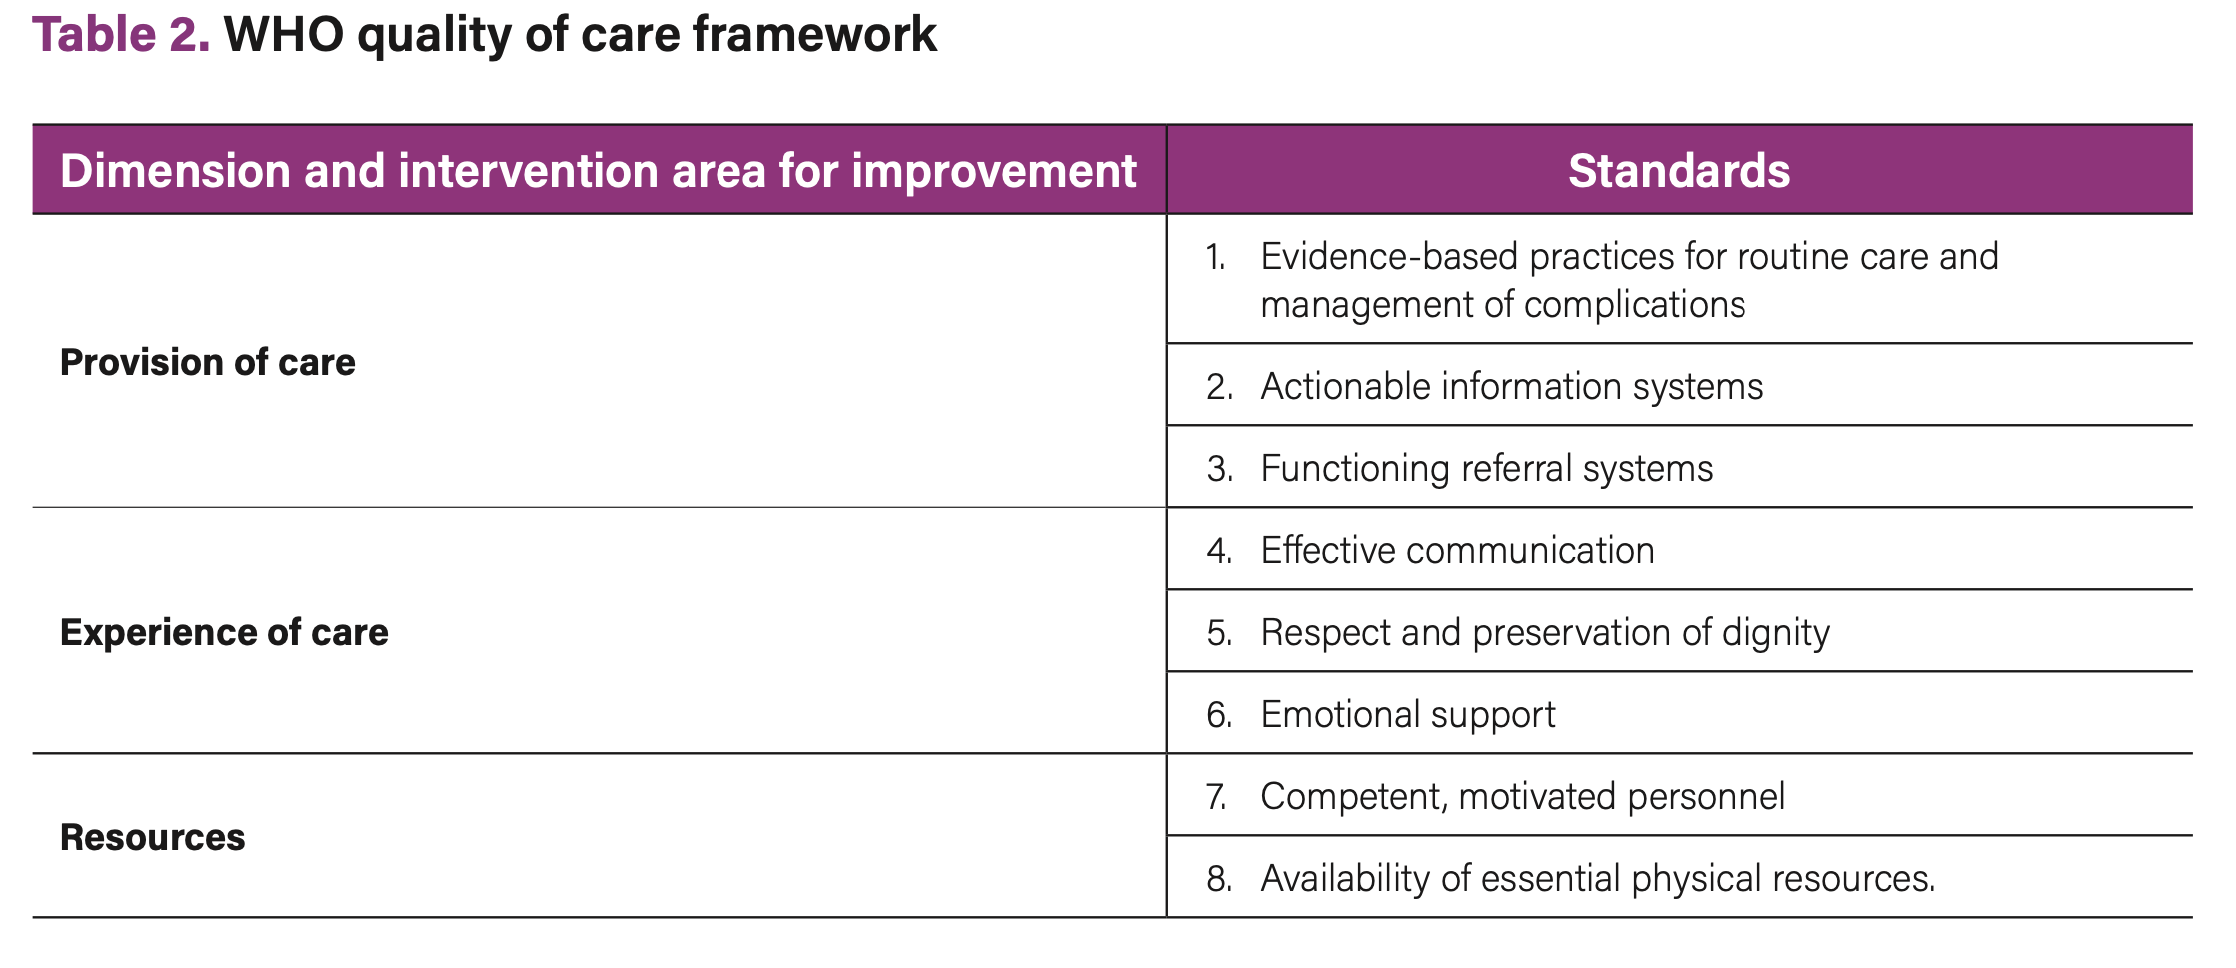 Table 2. WHO quality of care framework